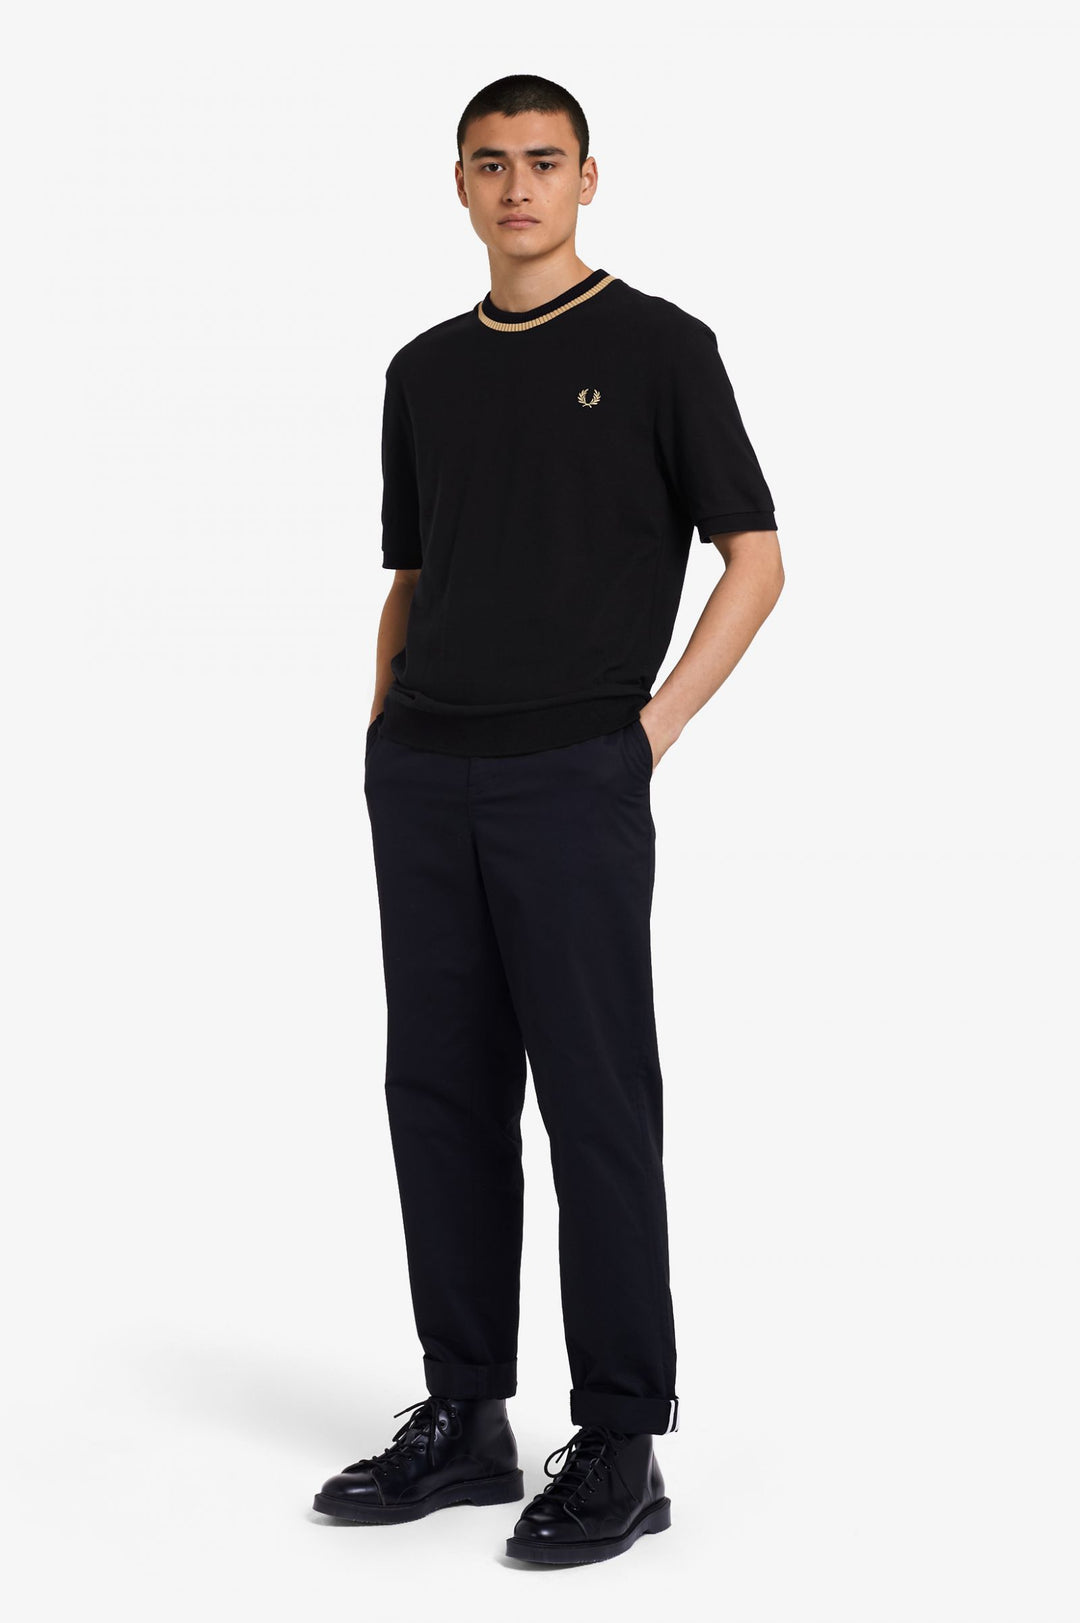 Fred Perry Reissues Crew Neck Pique T-Shirt - Black/Champagne